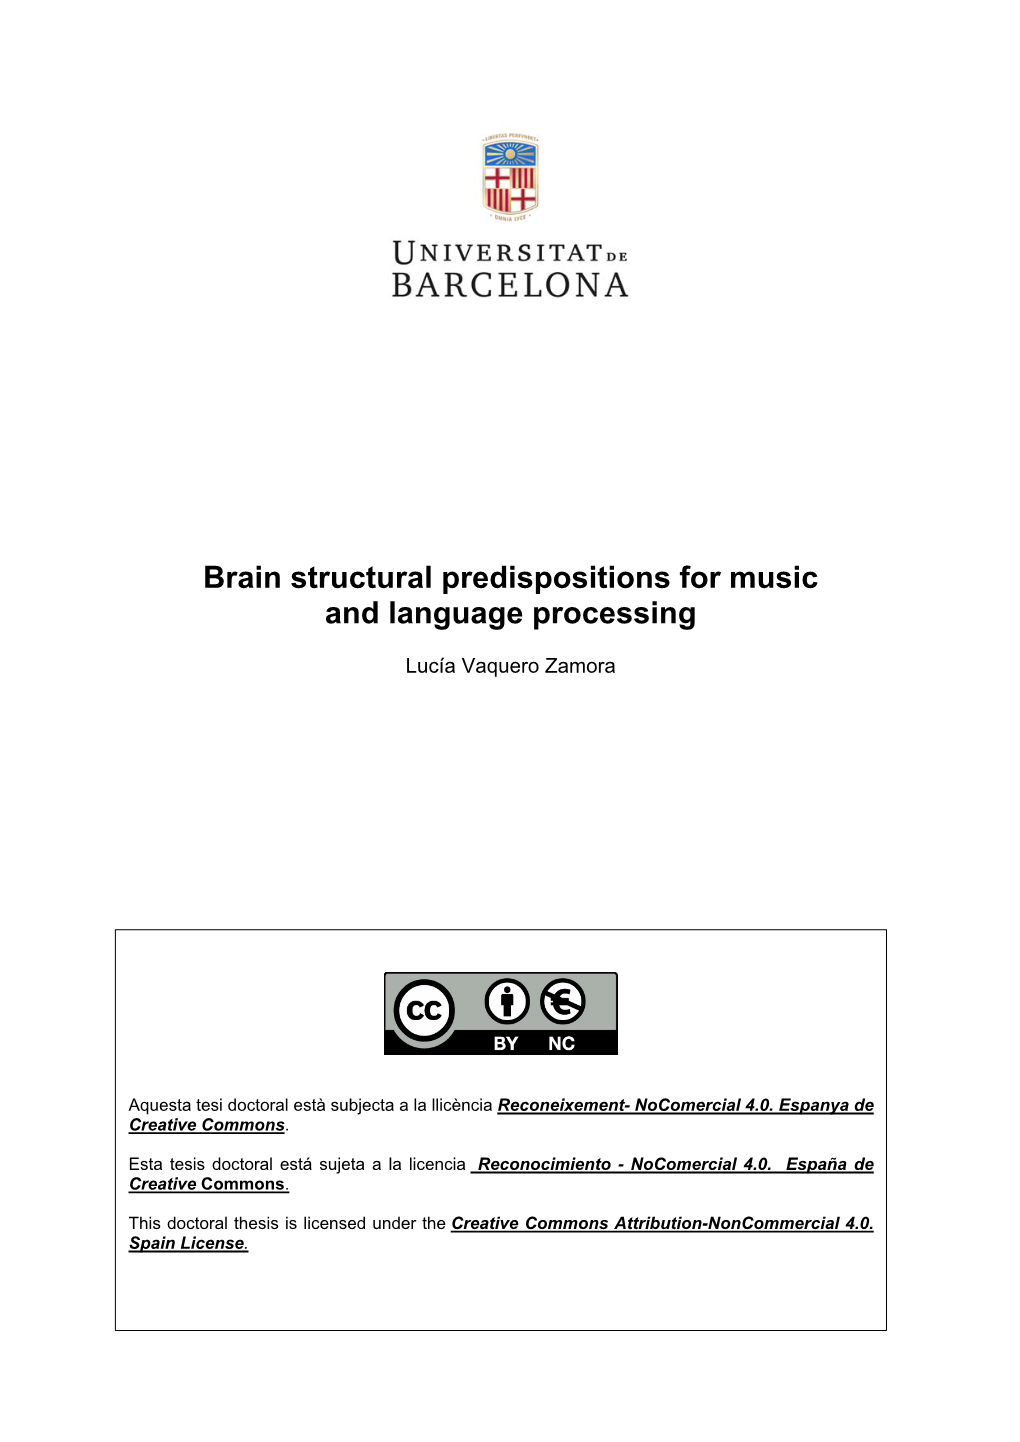 Brain Structural Predispositions for Music and Language Processing